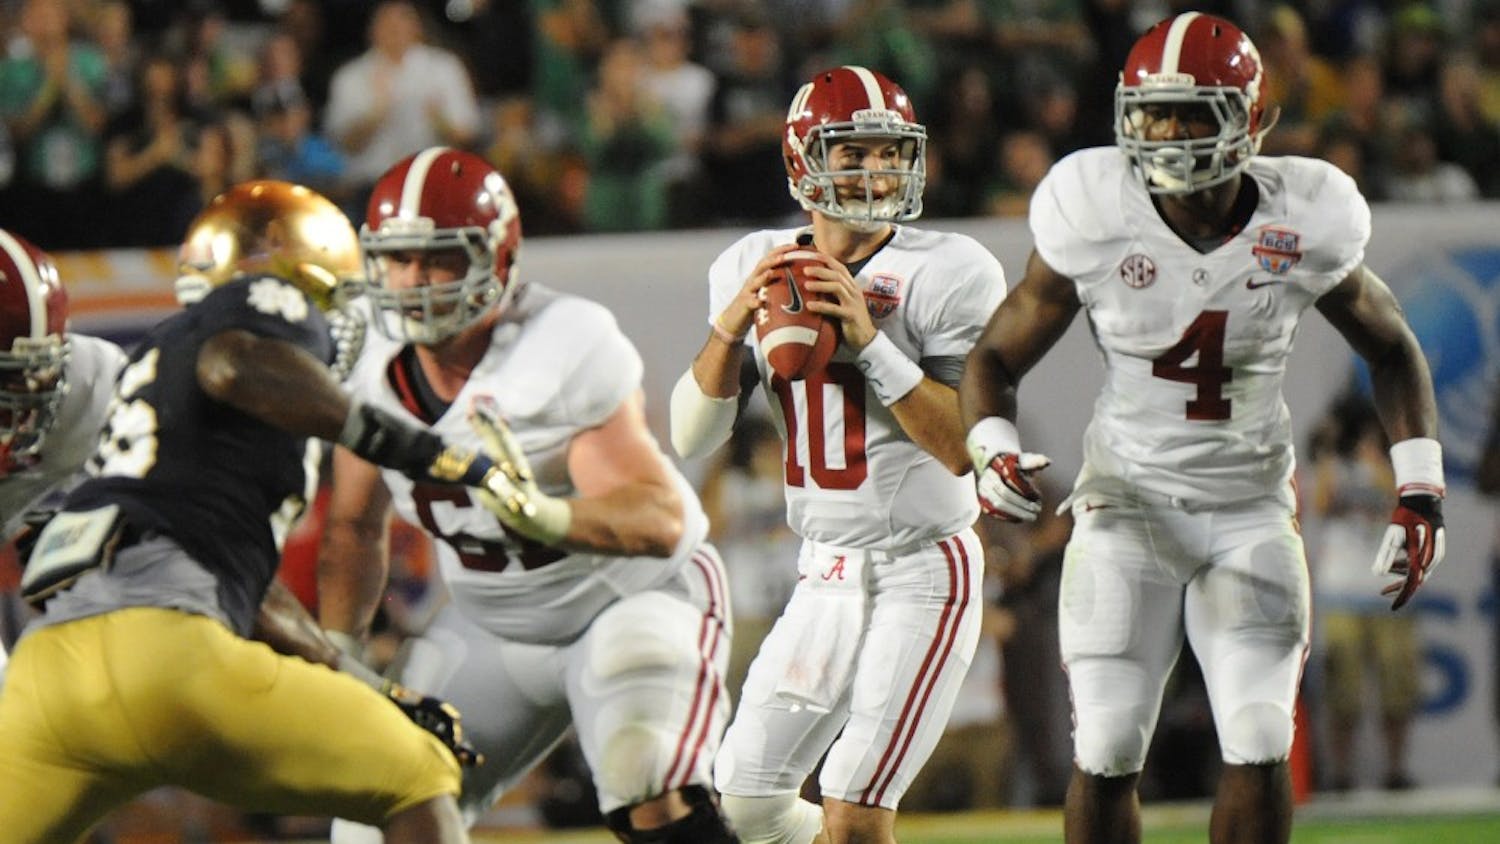 AJ McCarron of Alabama drops back to pass against Notre Dame during the BCS National Championship game at Sun Life Stadium in Miami Gardens, Florida, on Monday, January 7, 2013. (Jim Rassol/Sun Sentinel/MCT)